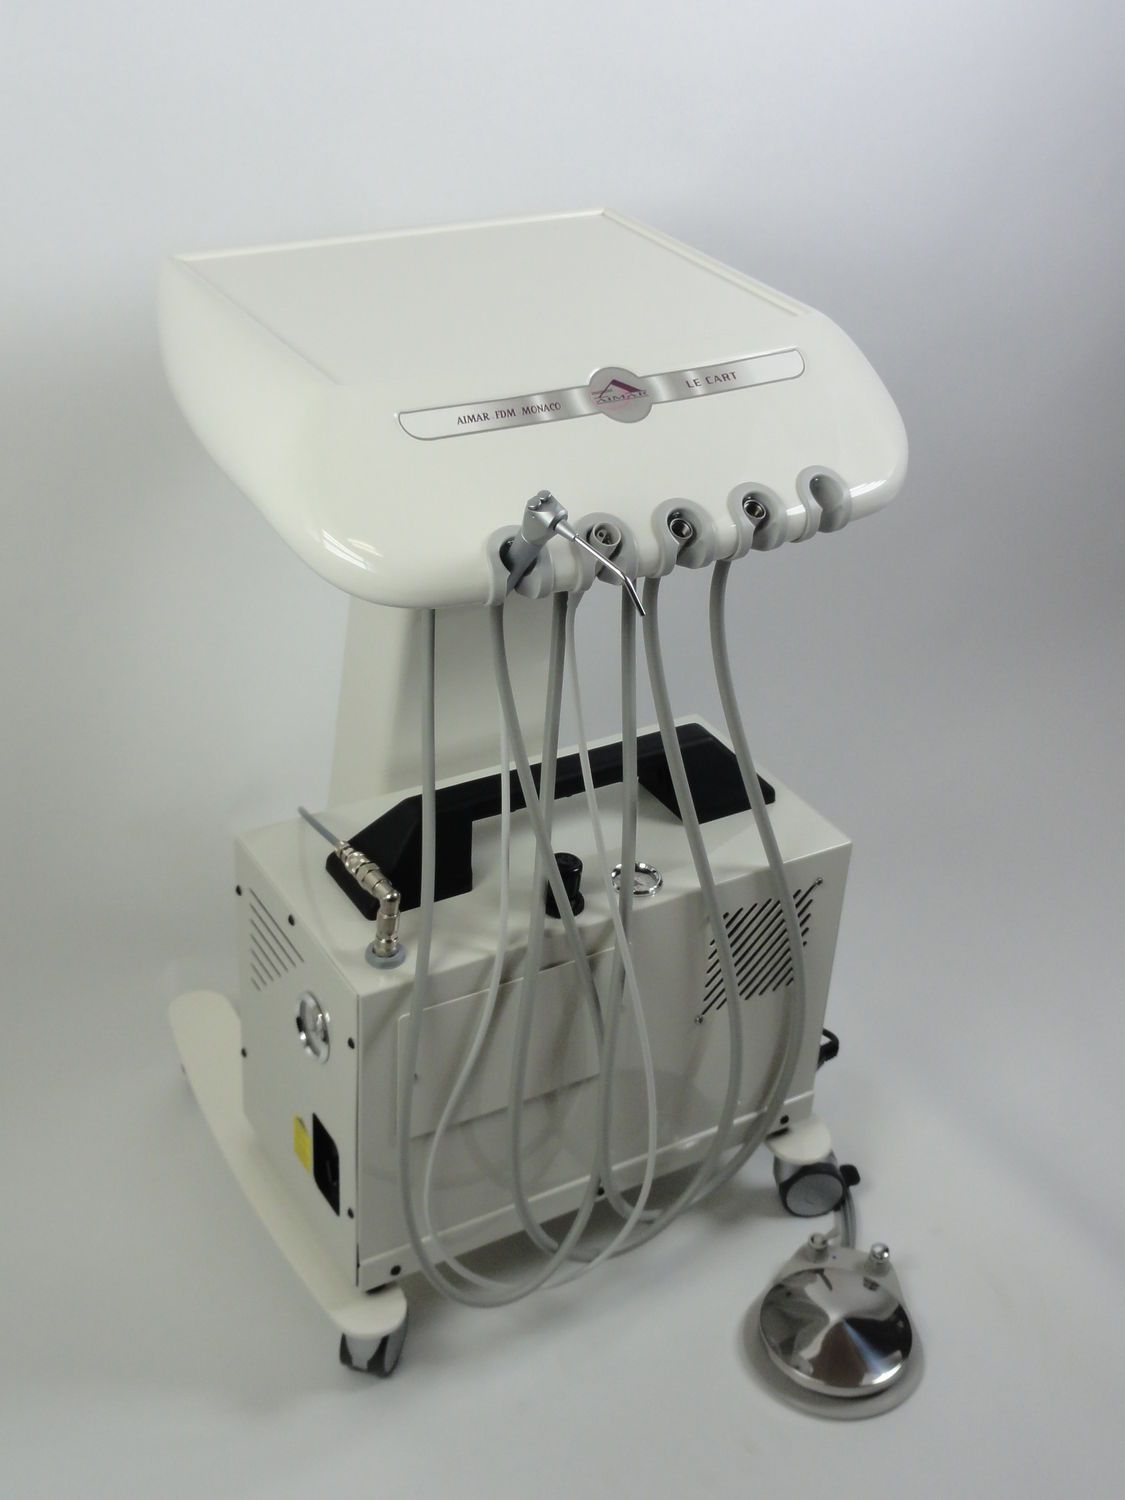 Mobile dental delivery system 1-380-AUTO-SEC AIMAR